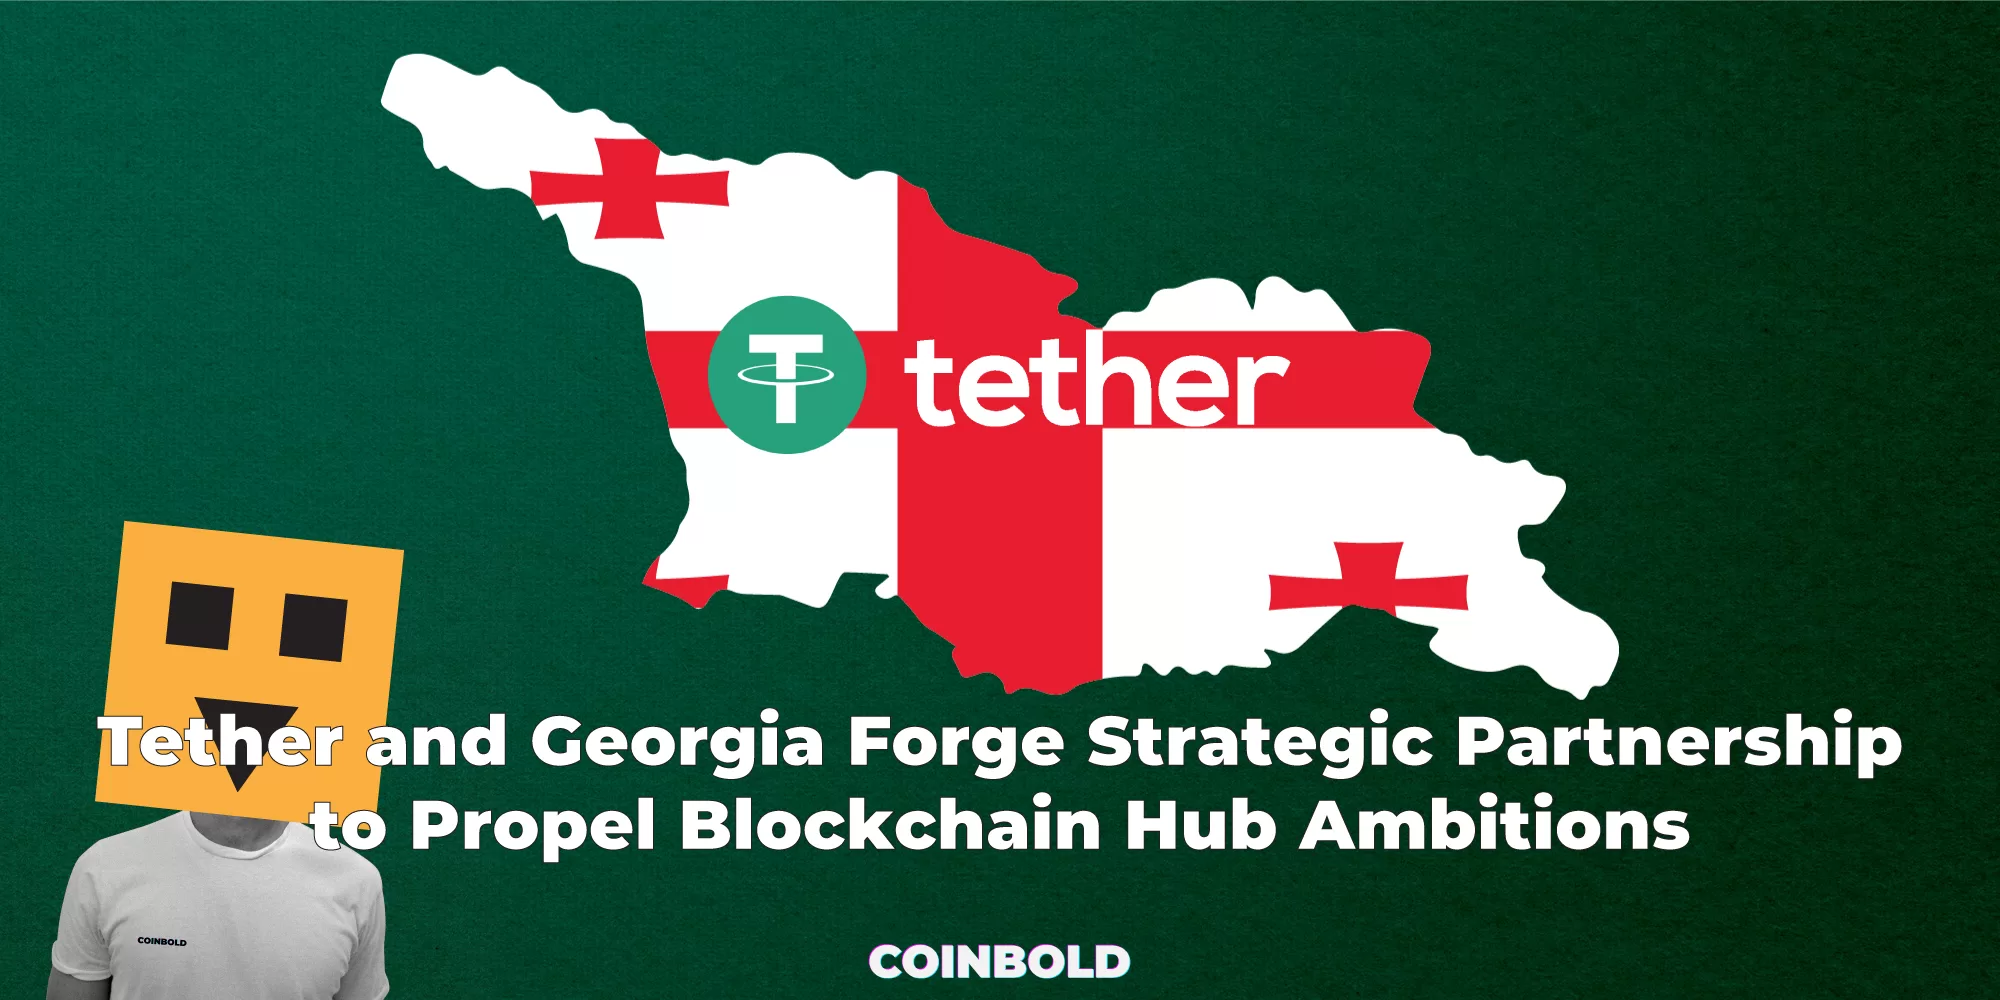 Tether and Georgia Forge Strategic Partnership to Propel Blockchain Hub Ambitions